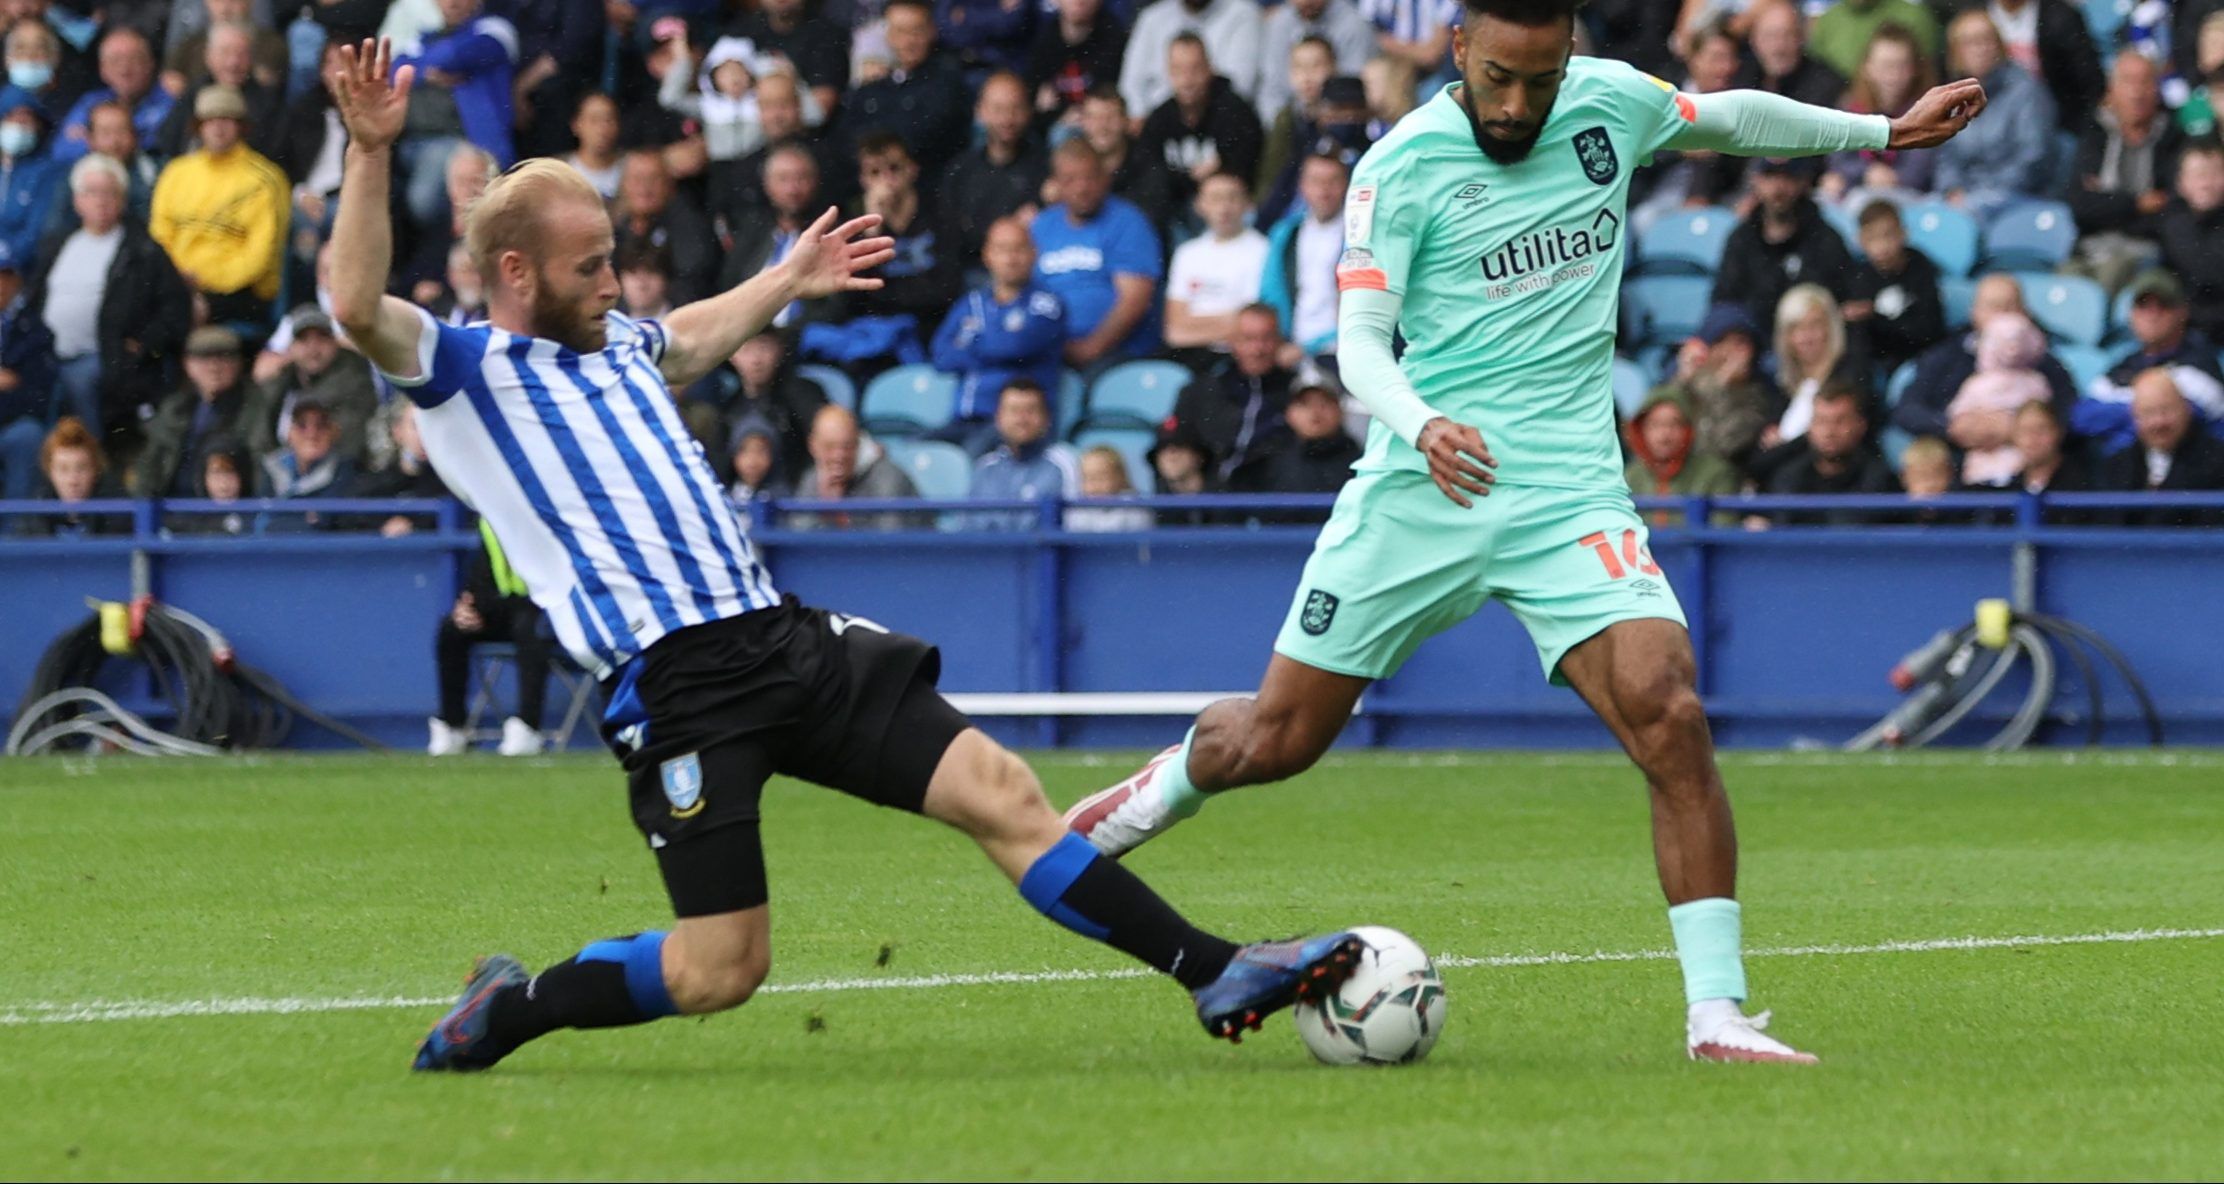 Soccer Football - Carabao Cup First Round - Sheffield Wednesday v Huddersfield Town - Hillsborough, Sheffield, Britain - August 1, 2021 Sheffield Wednesday's Barry Bannan in action with Huddersfield Town's Sorba Thomas Action Images/Lee Smith